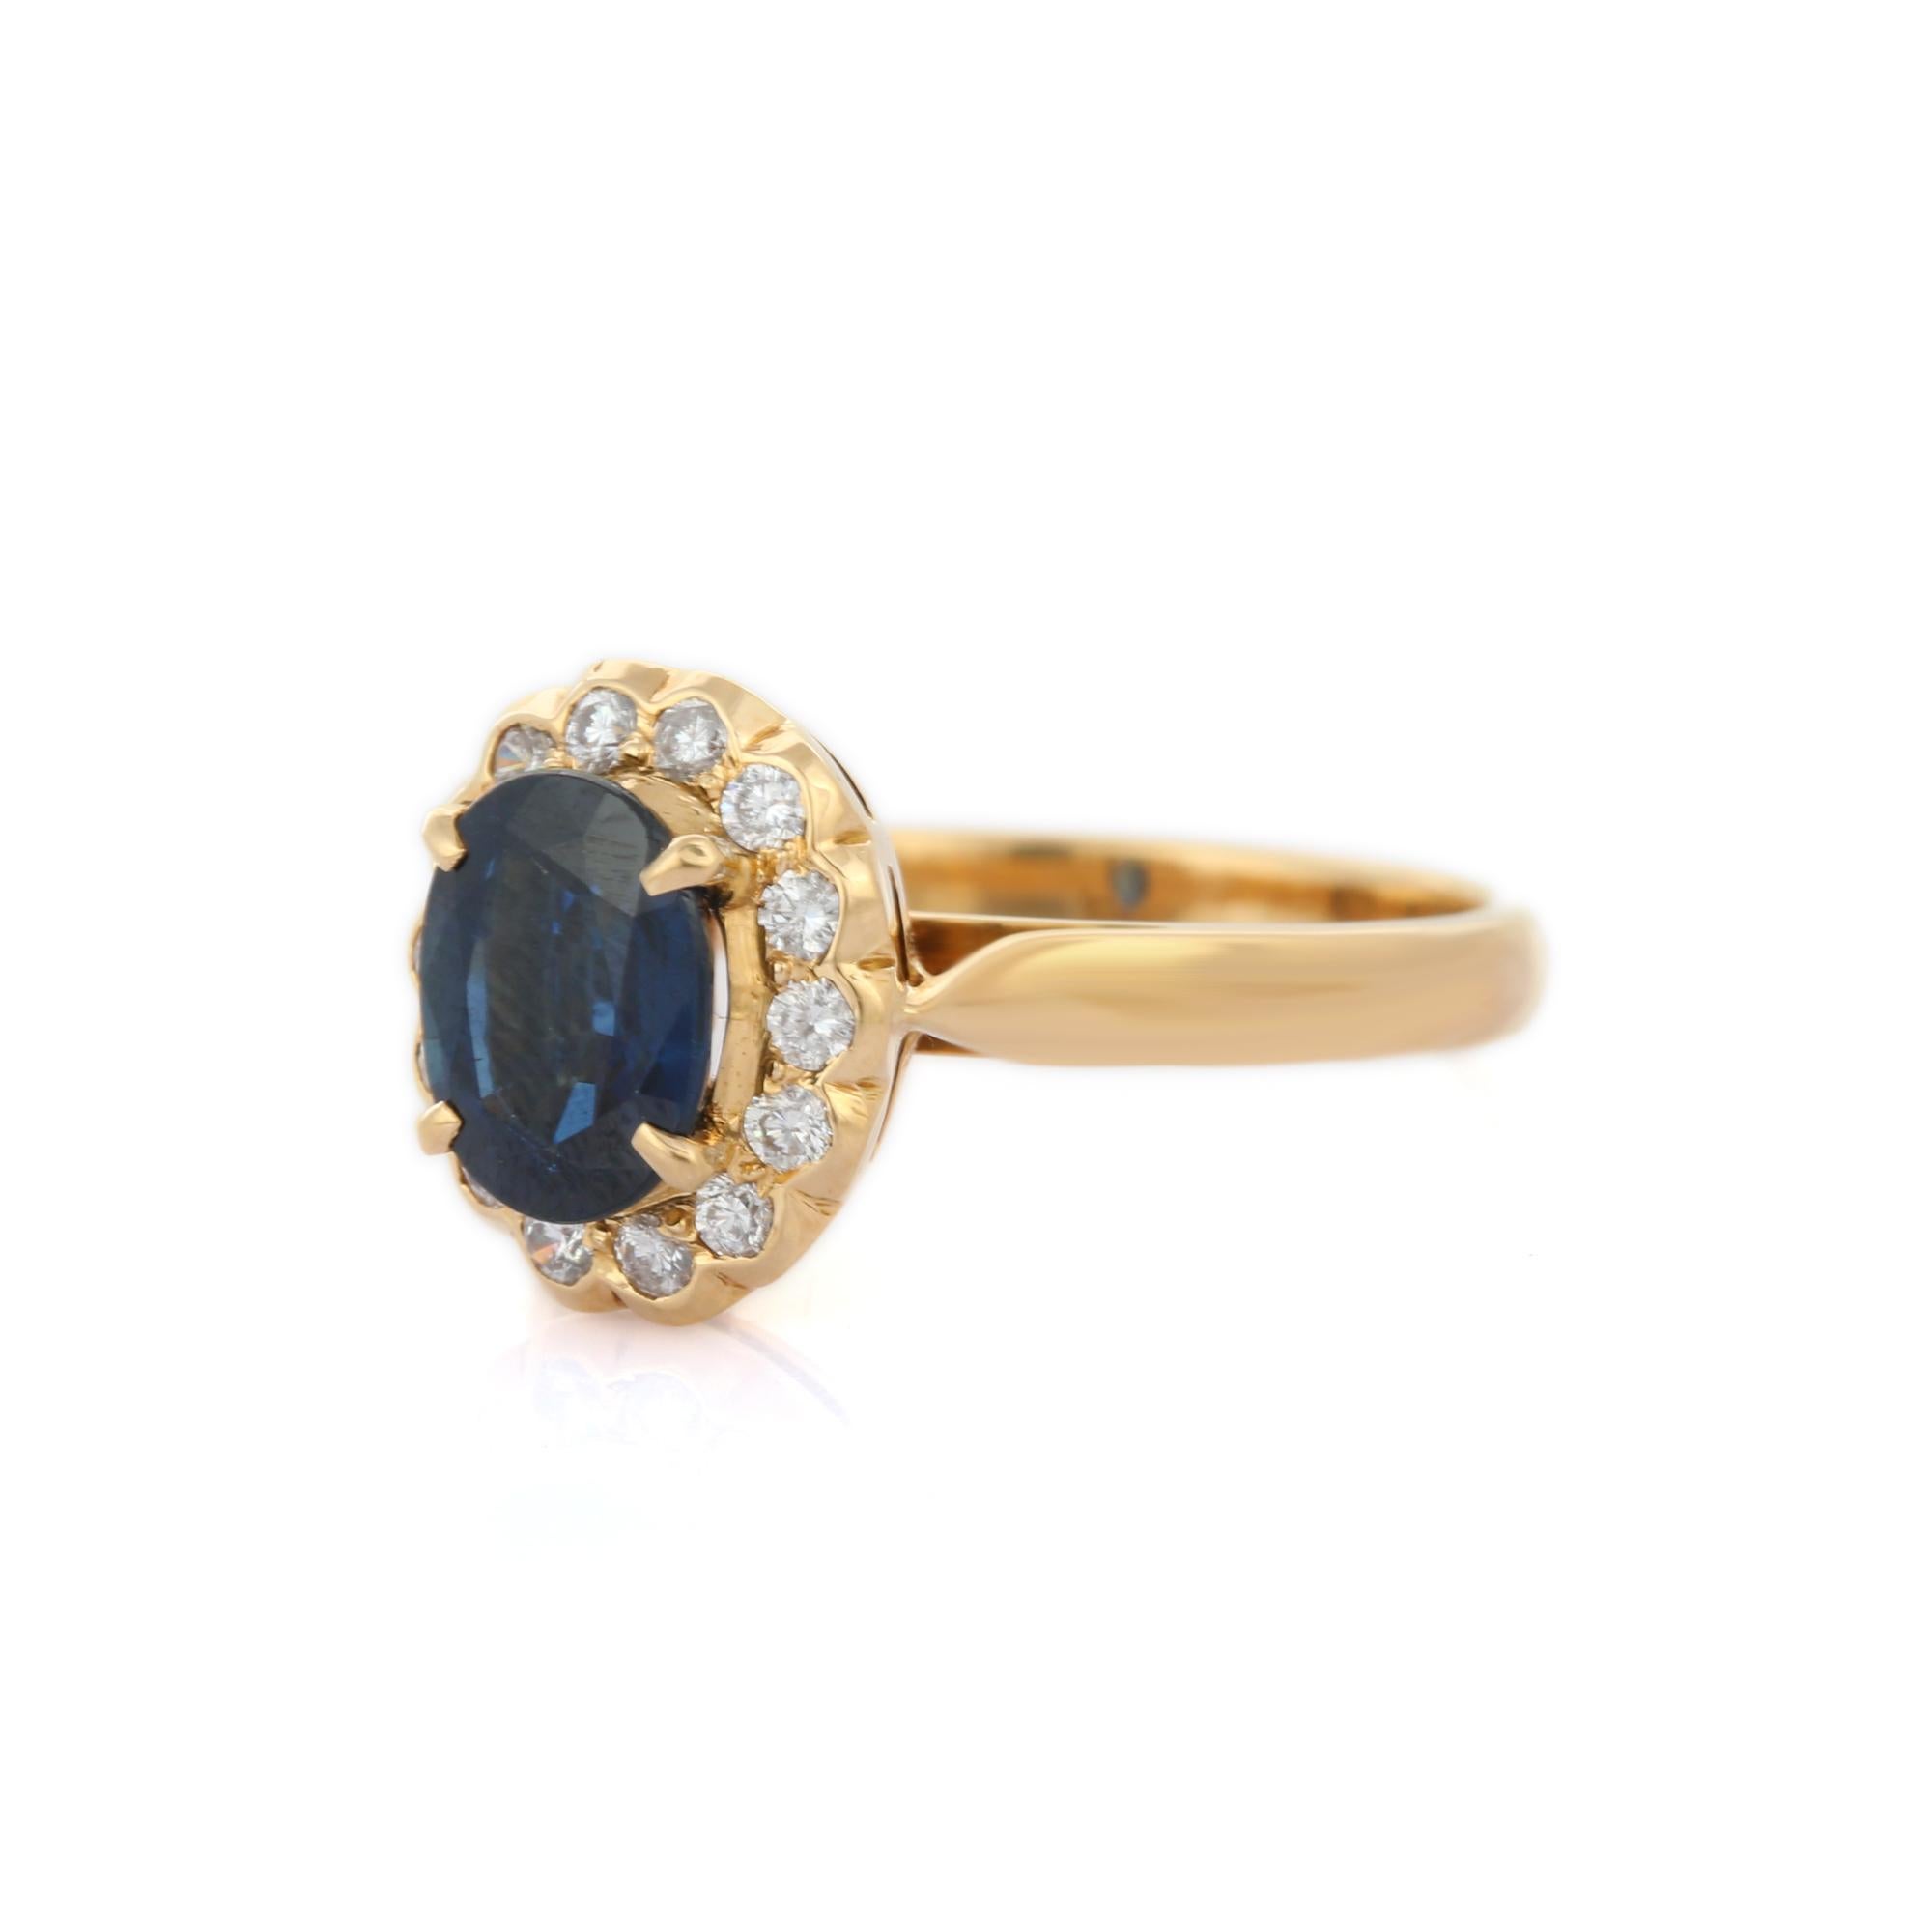 For Sale:  Vivacious 2.2 Ct Blue Sapphire and Diamond Halo Wedding Ring in 18K Yellow Gold 4